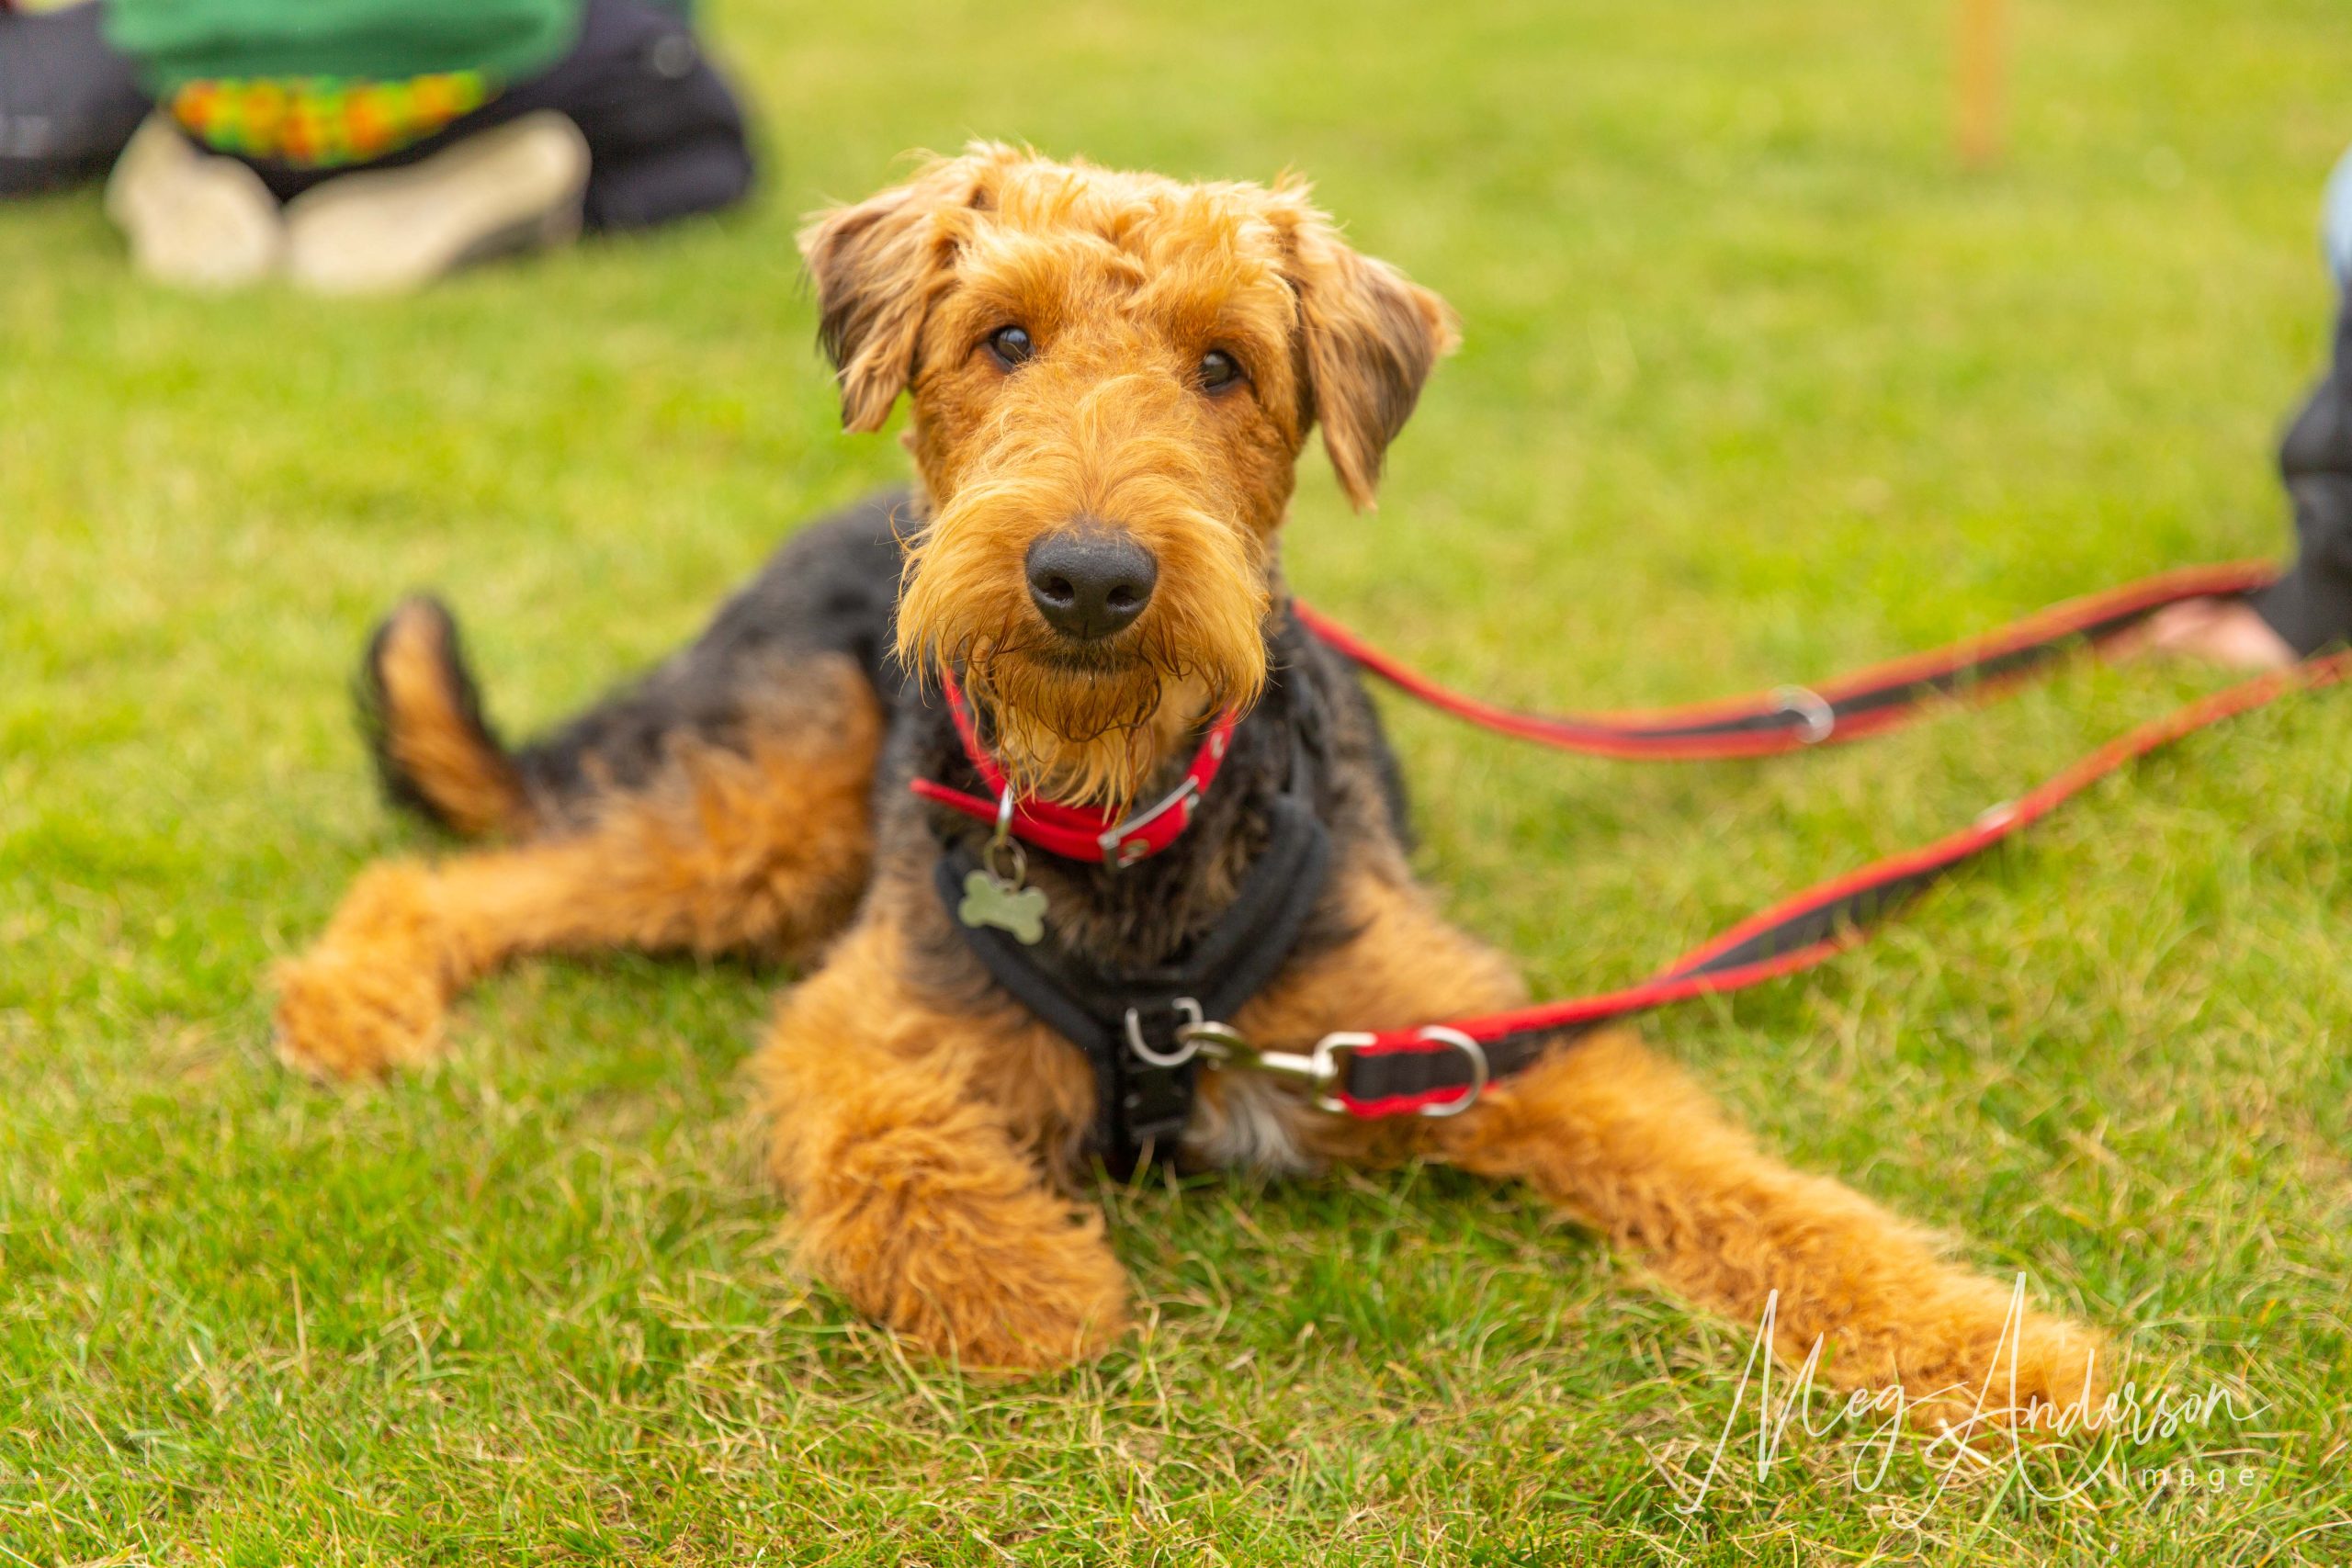 A terrier lying on the grass and looking at the camera